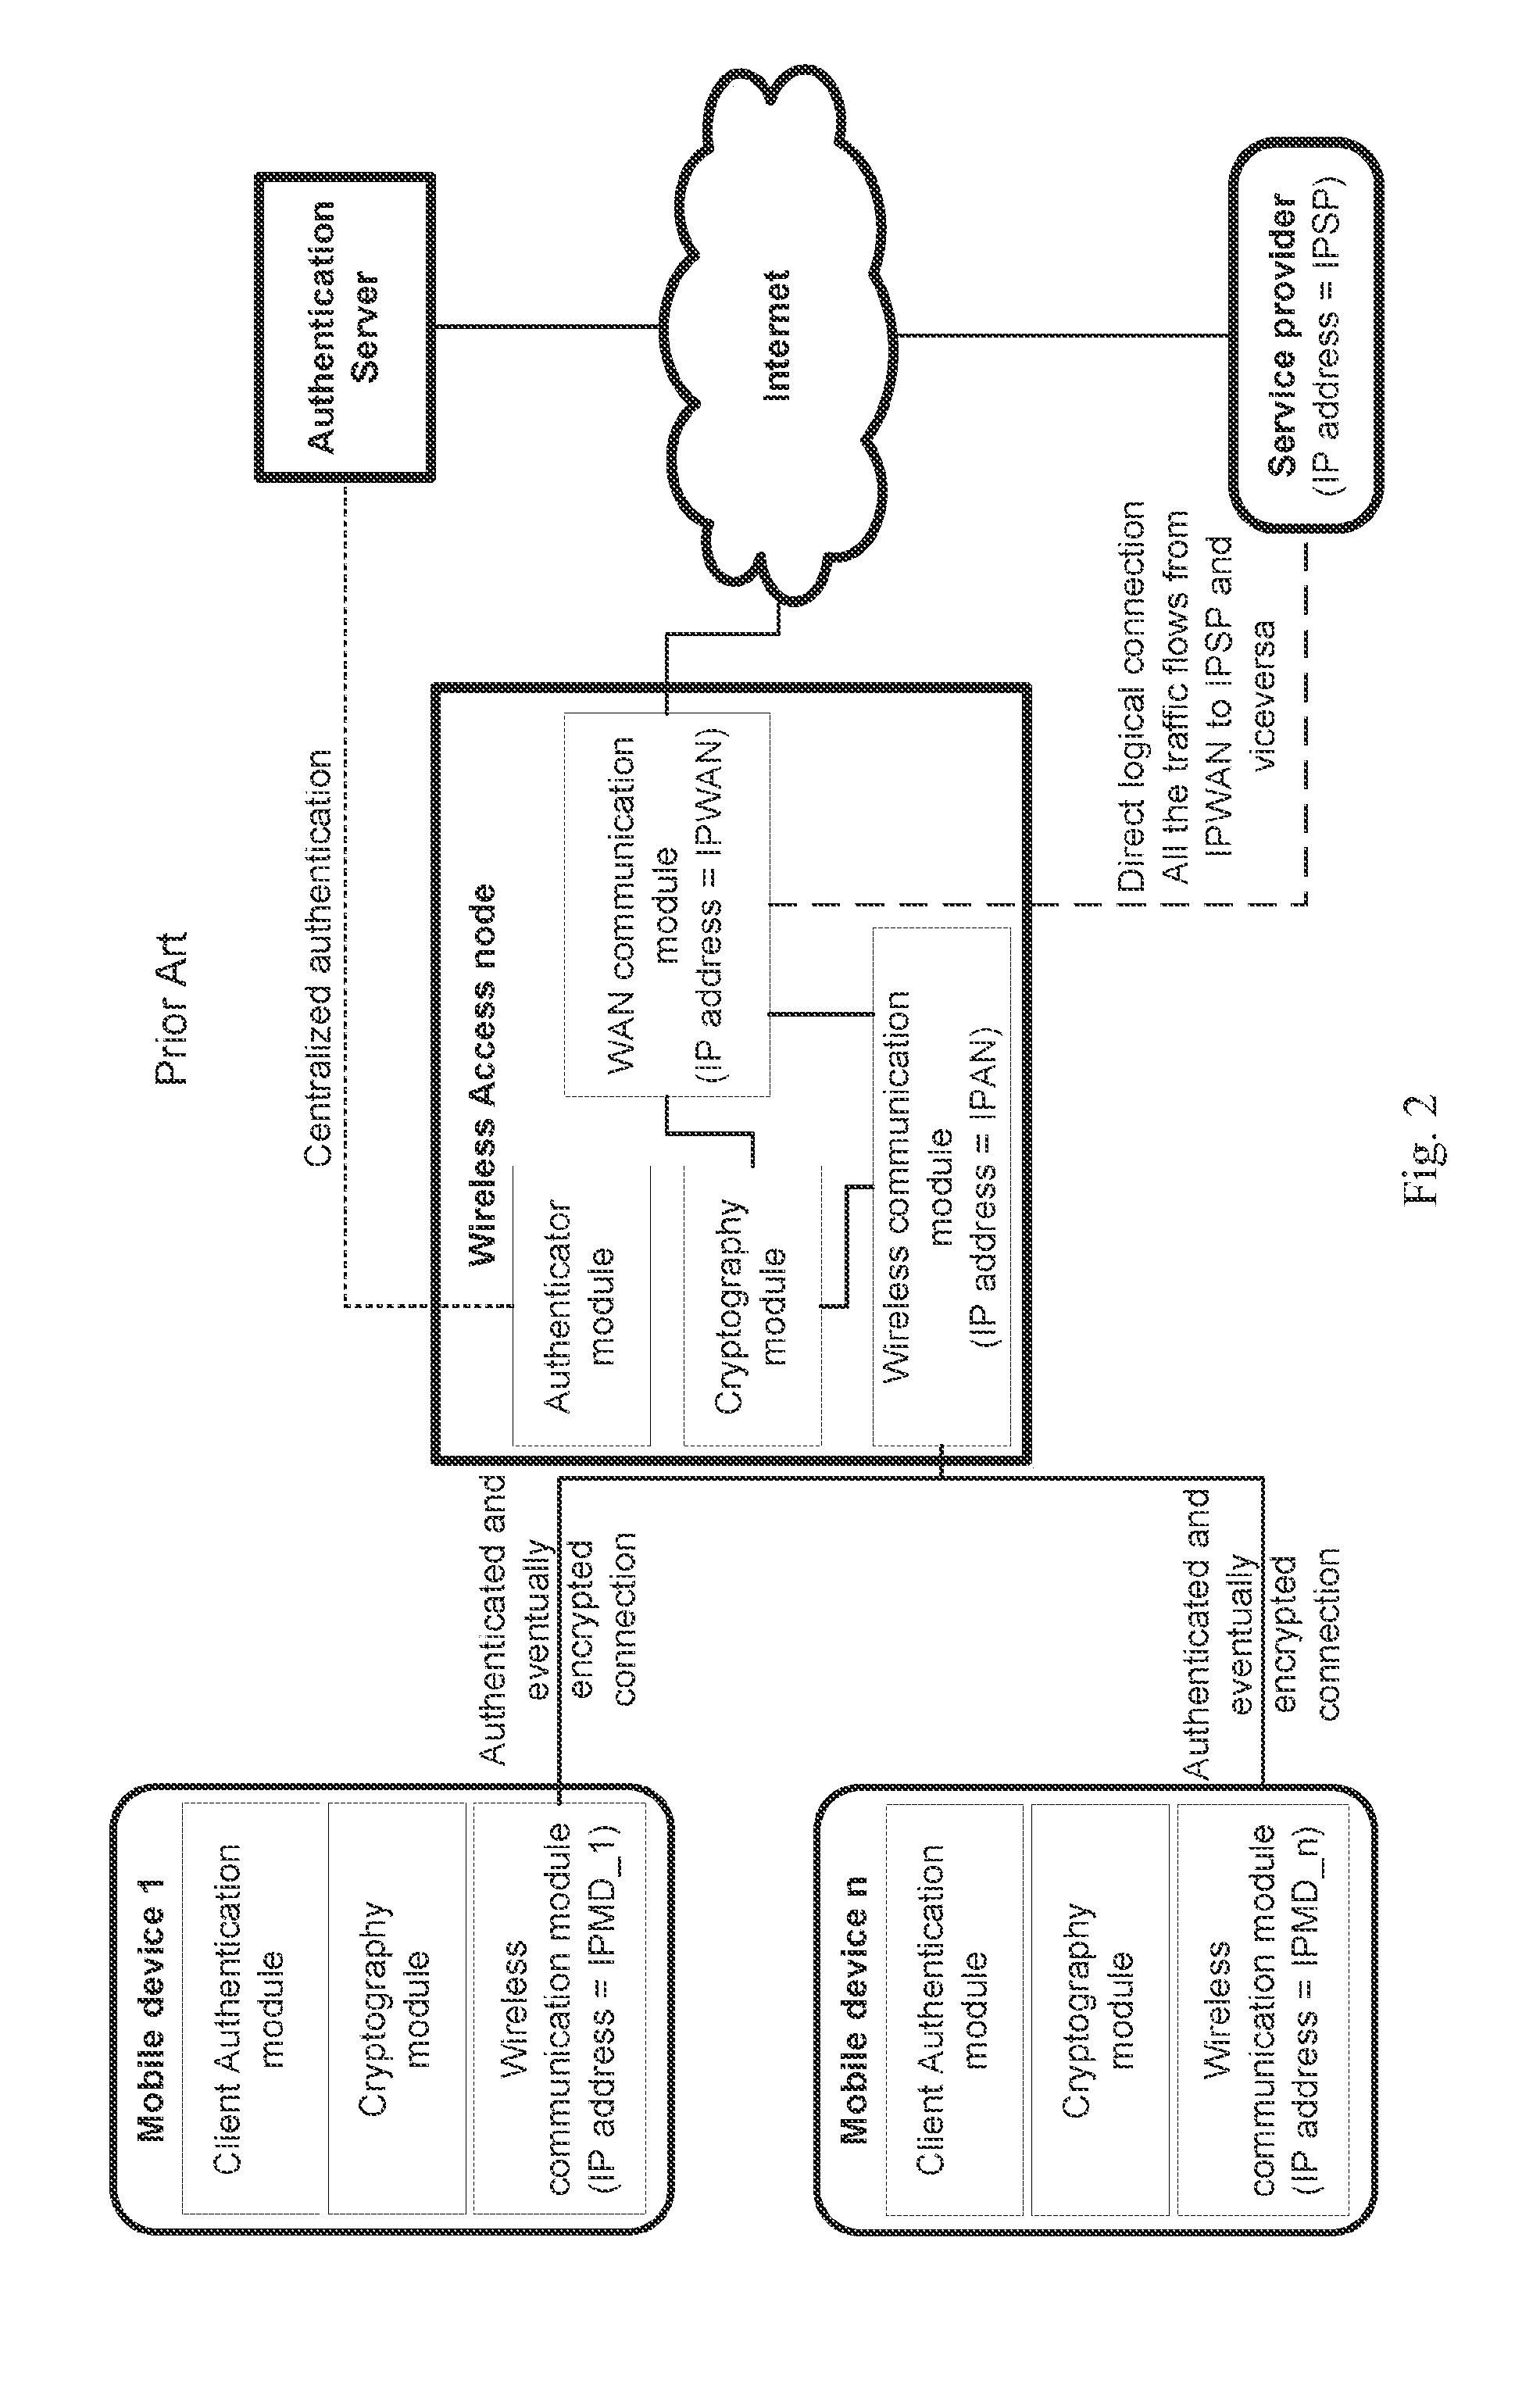 Method and system for wireless connecting a mobile device to a service provider through a hosting wireless access node